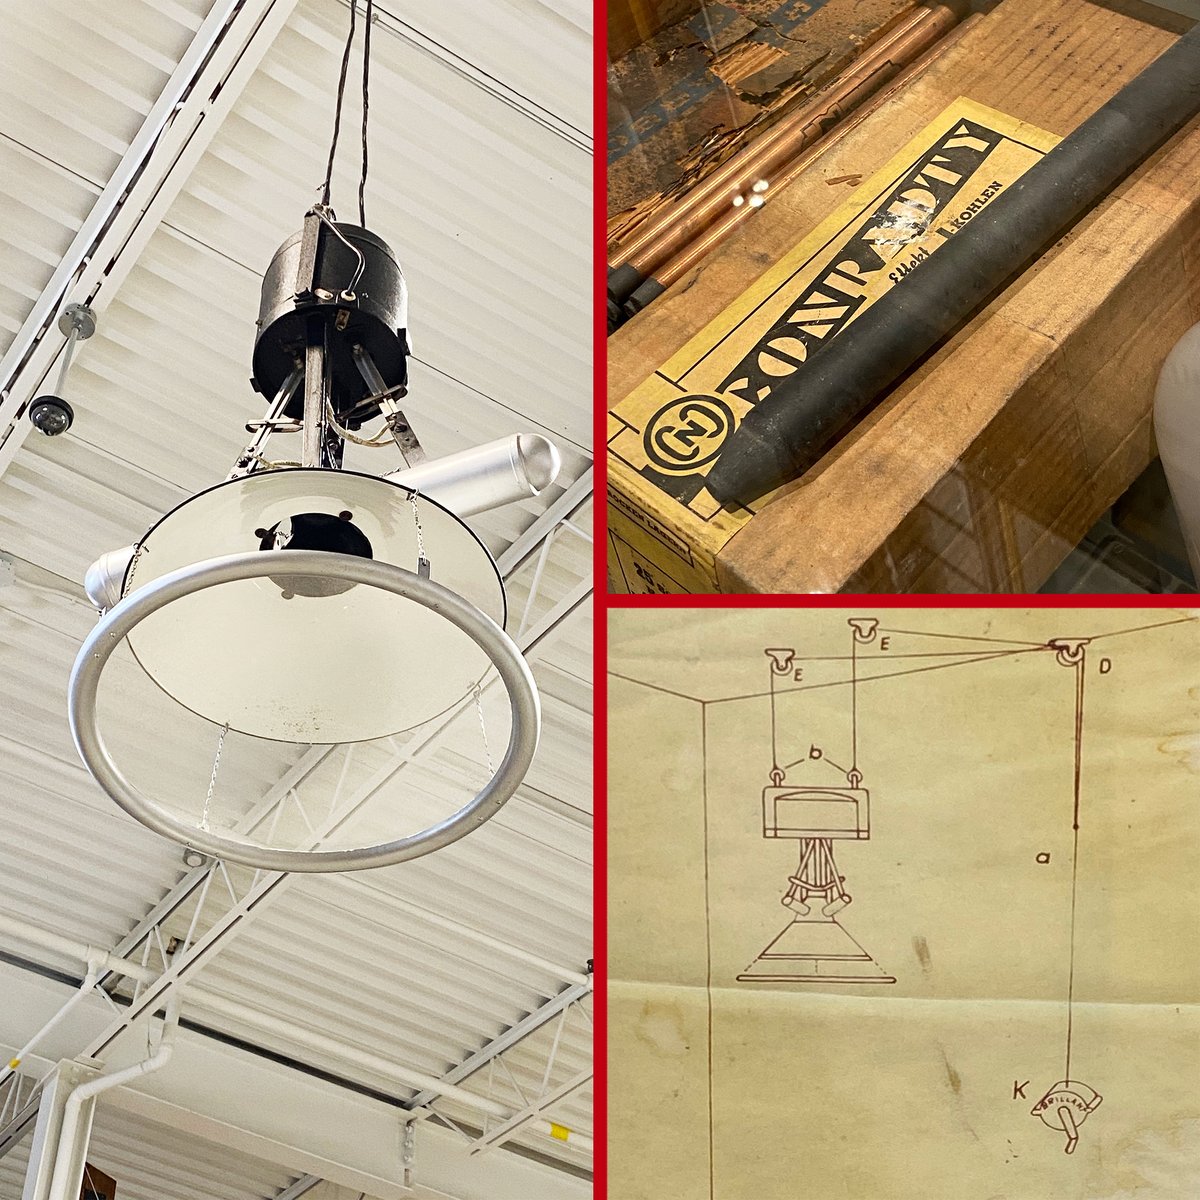 Hanging from the rafters is BRILLANT UV Light Source, w/charcoal sticks, ca 1961. Before CTP, arc lamp was used as light source in the processing of offset plates. Today, relief plates are still using #UV light for exposing & curing. #printingplate #WayBackWednesday #NuArc #coal